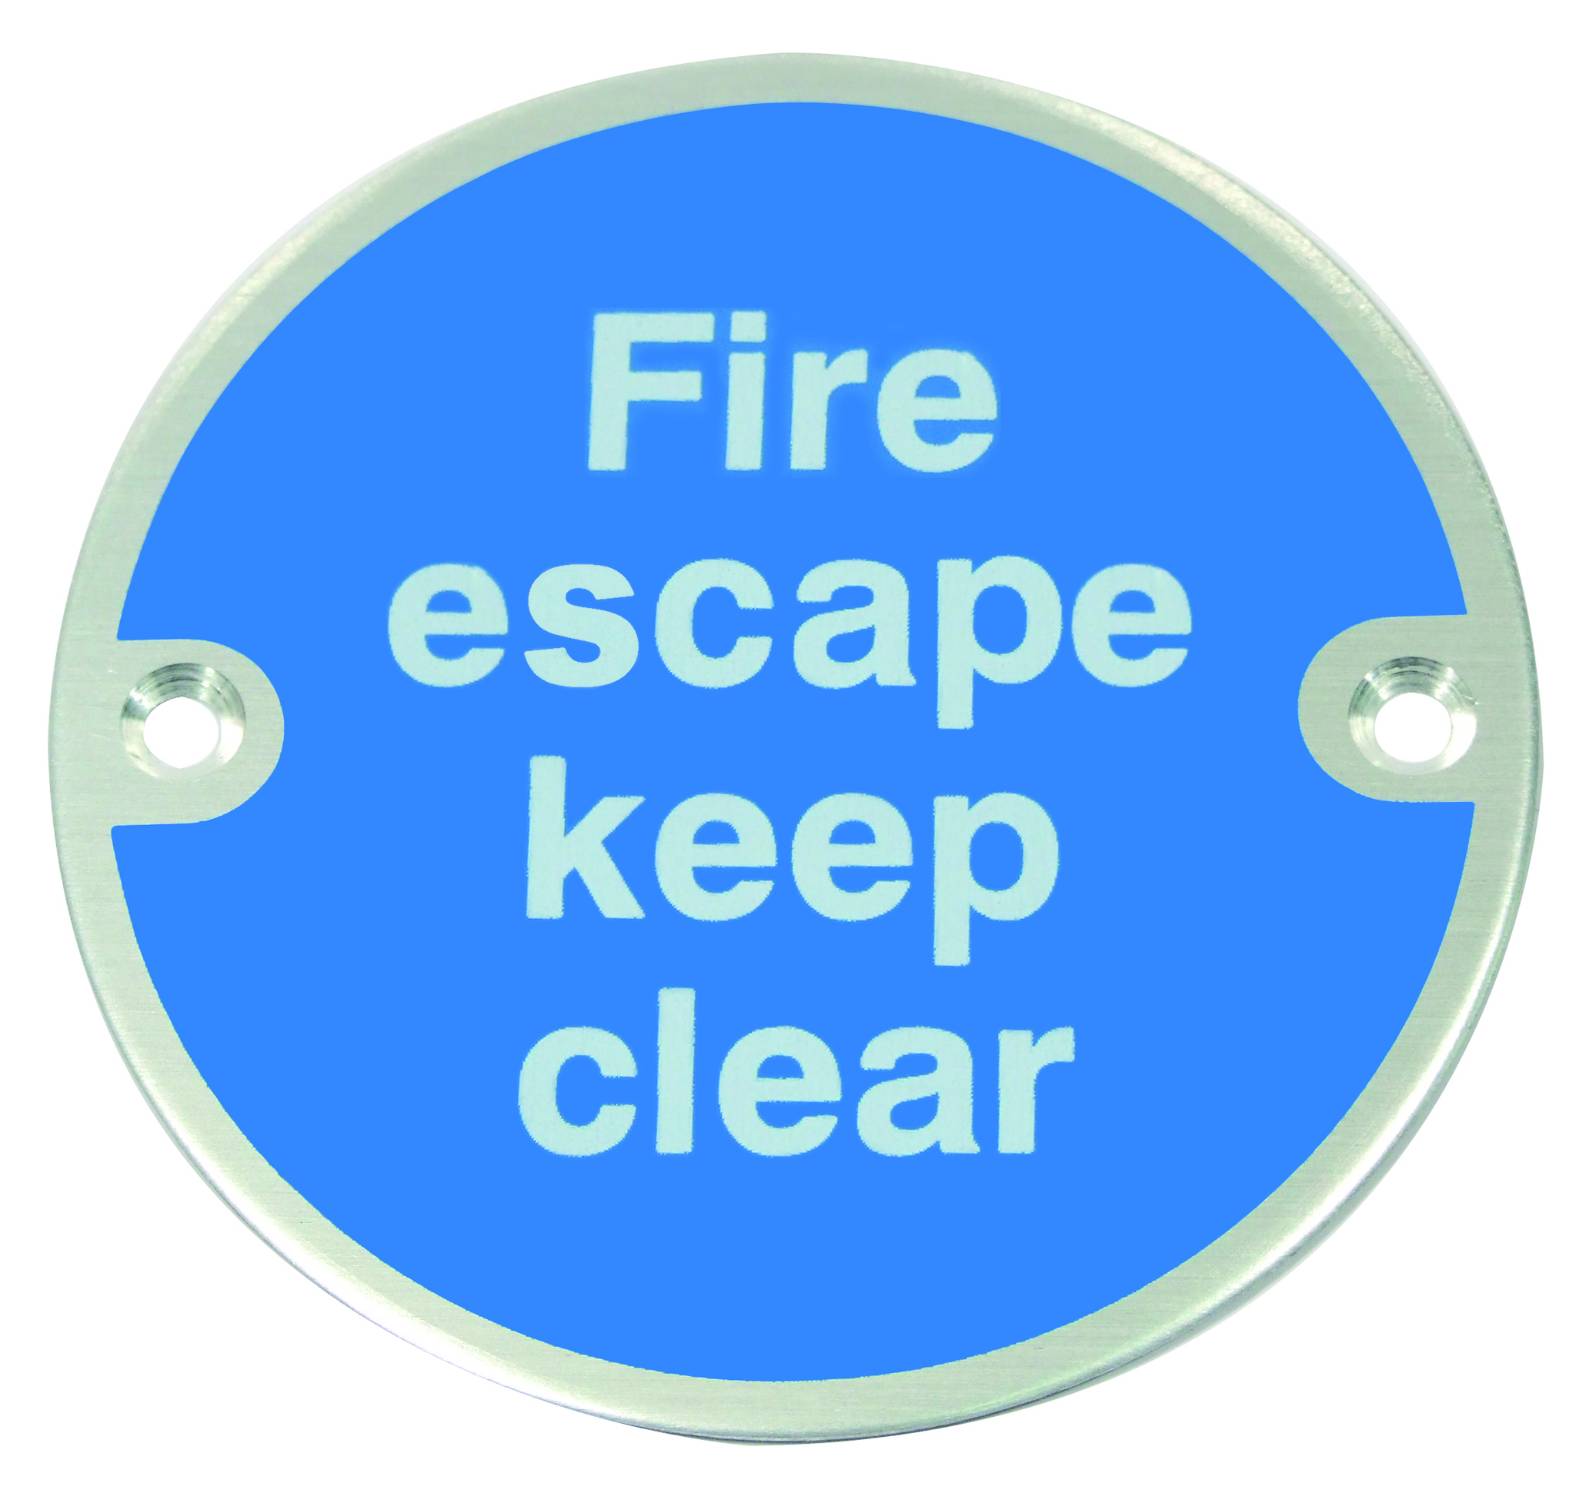 HUKP-0105-33 – Fire Escape Keep Clear - Fire signage